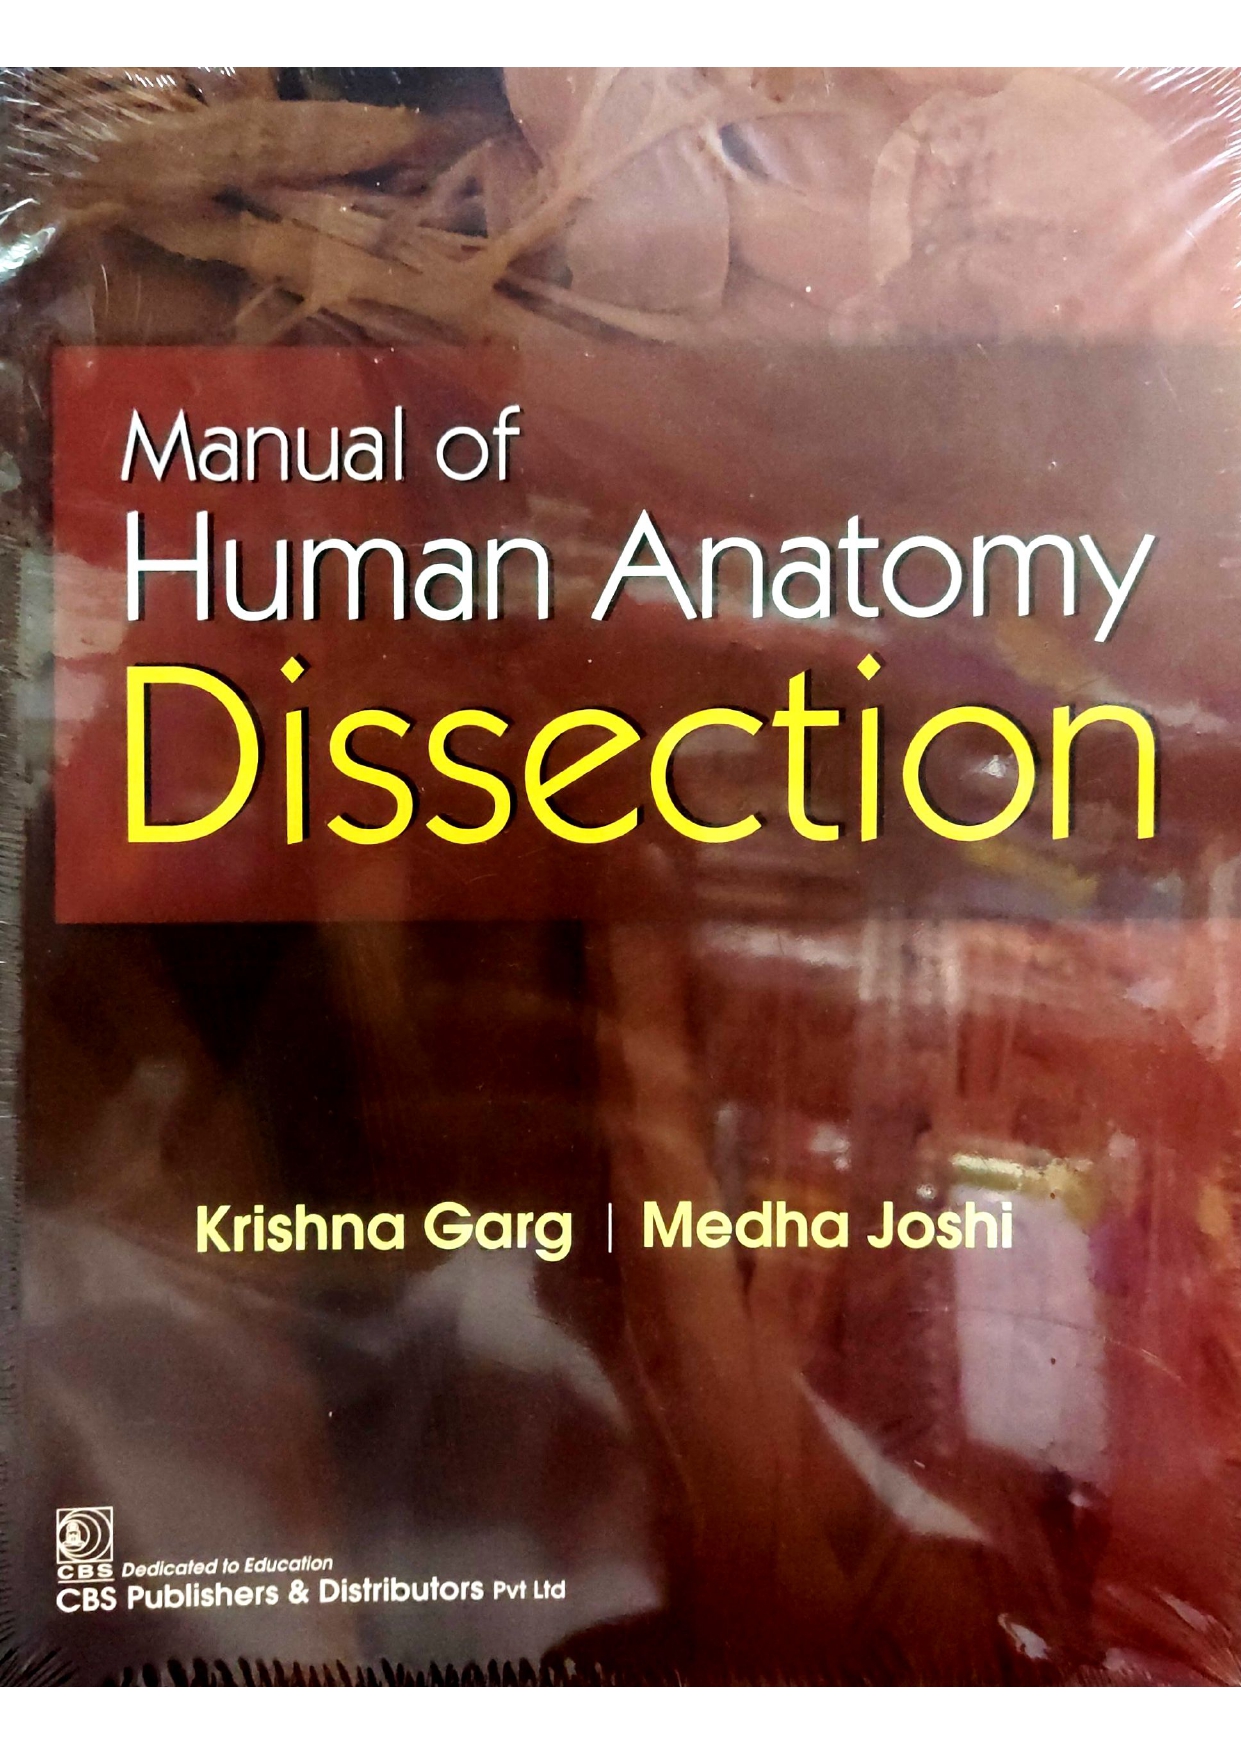 Manual Of Human Anatomy Dissection 2021